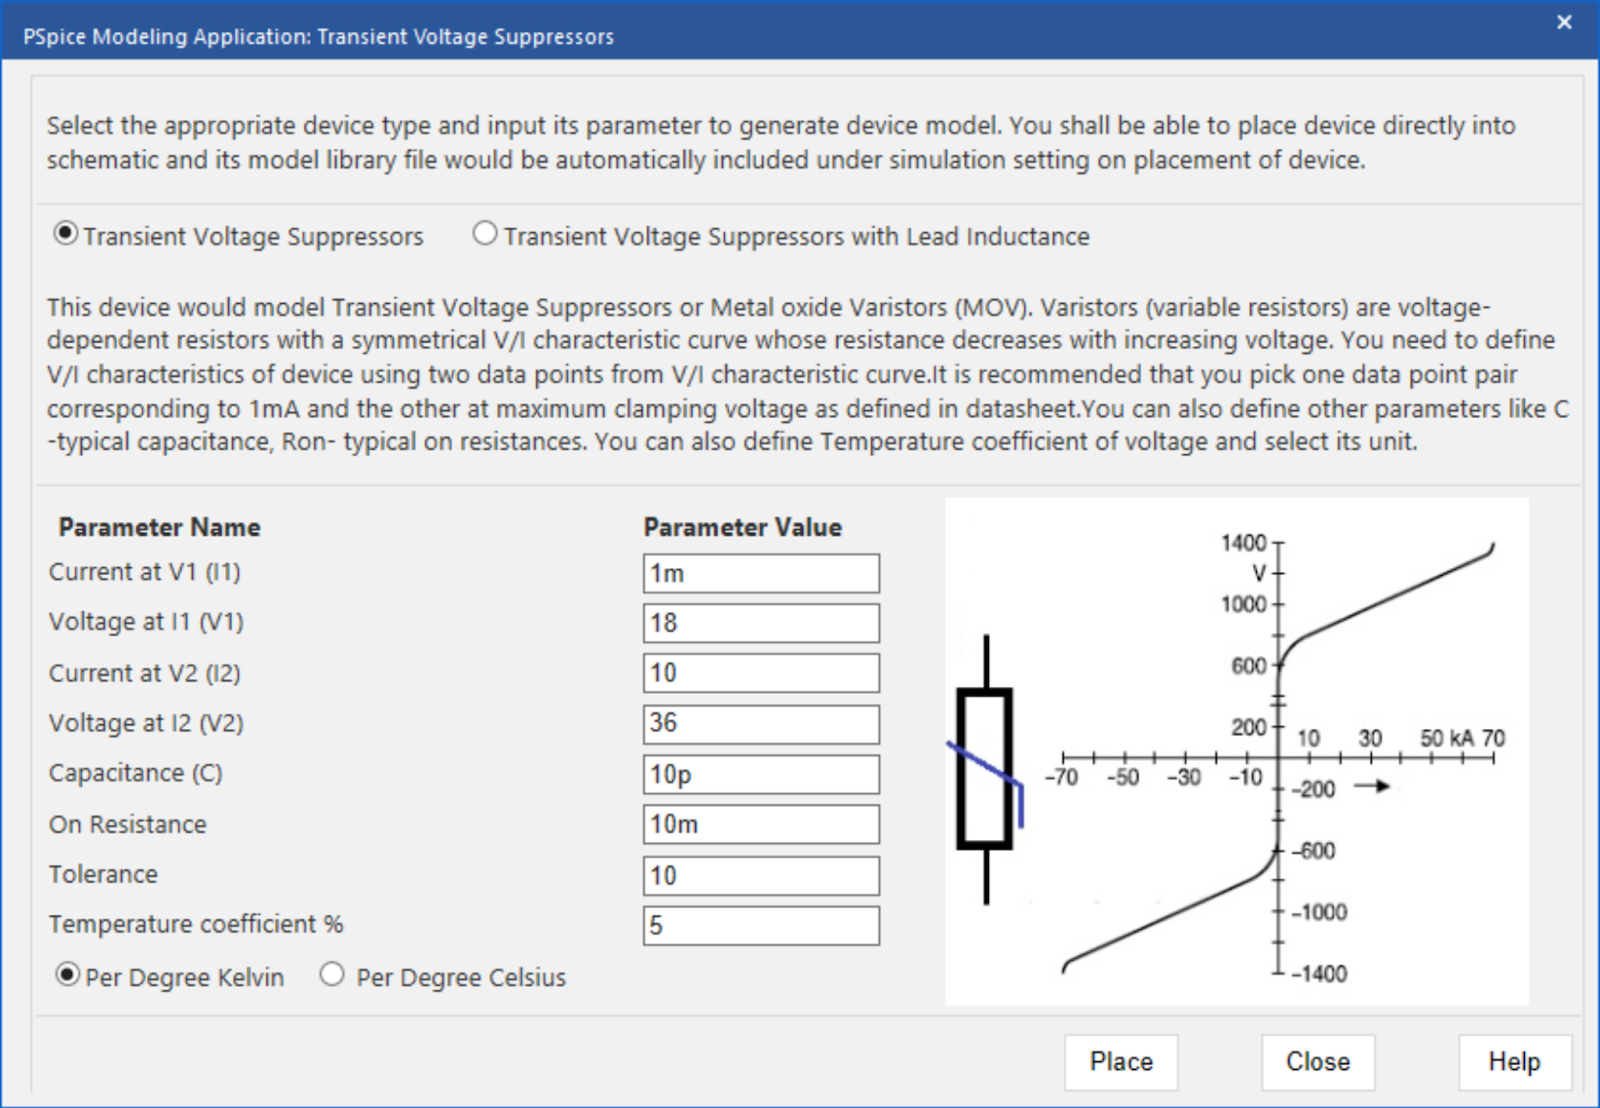 Create a transient voltage suppressor (TVS) SPICE Model with the PSpice Modeling Application